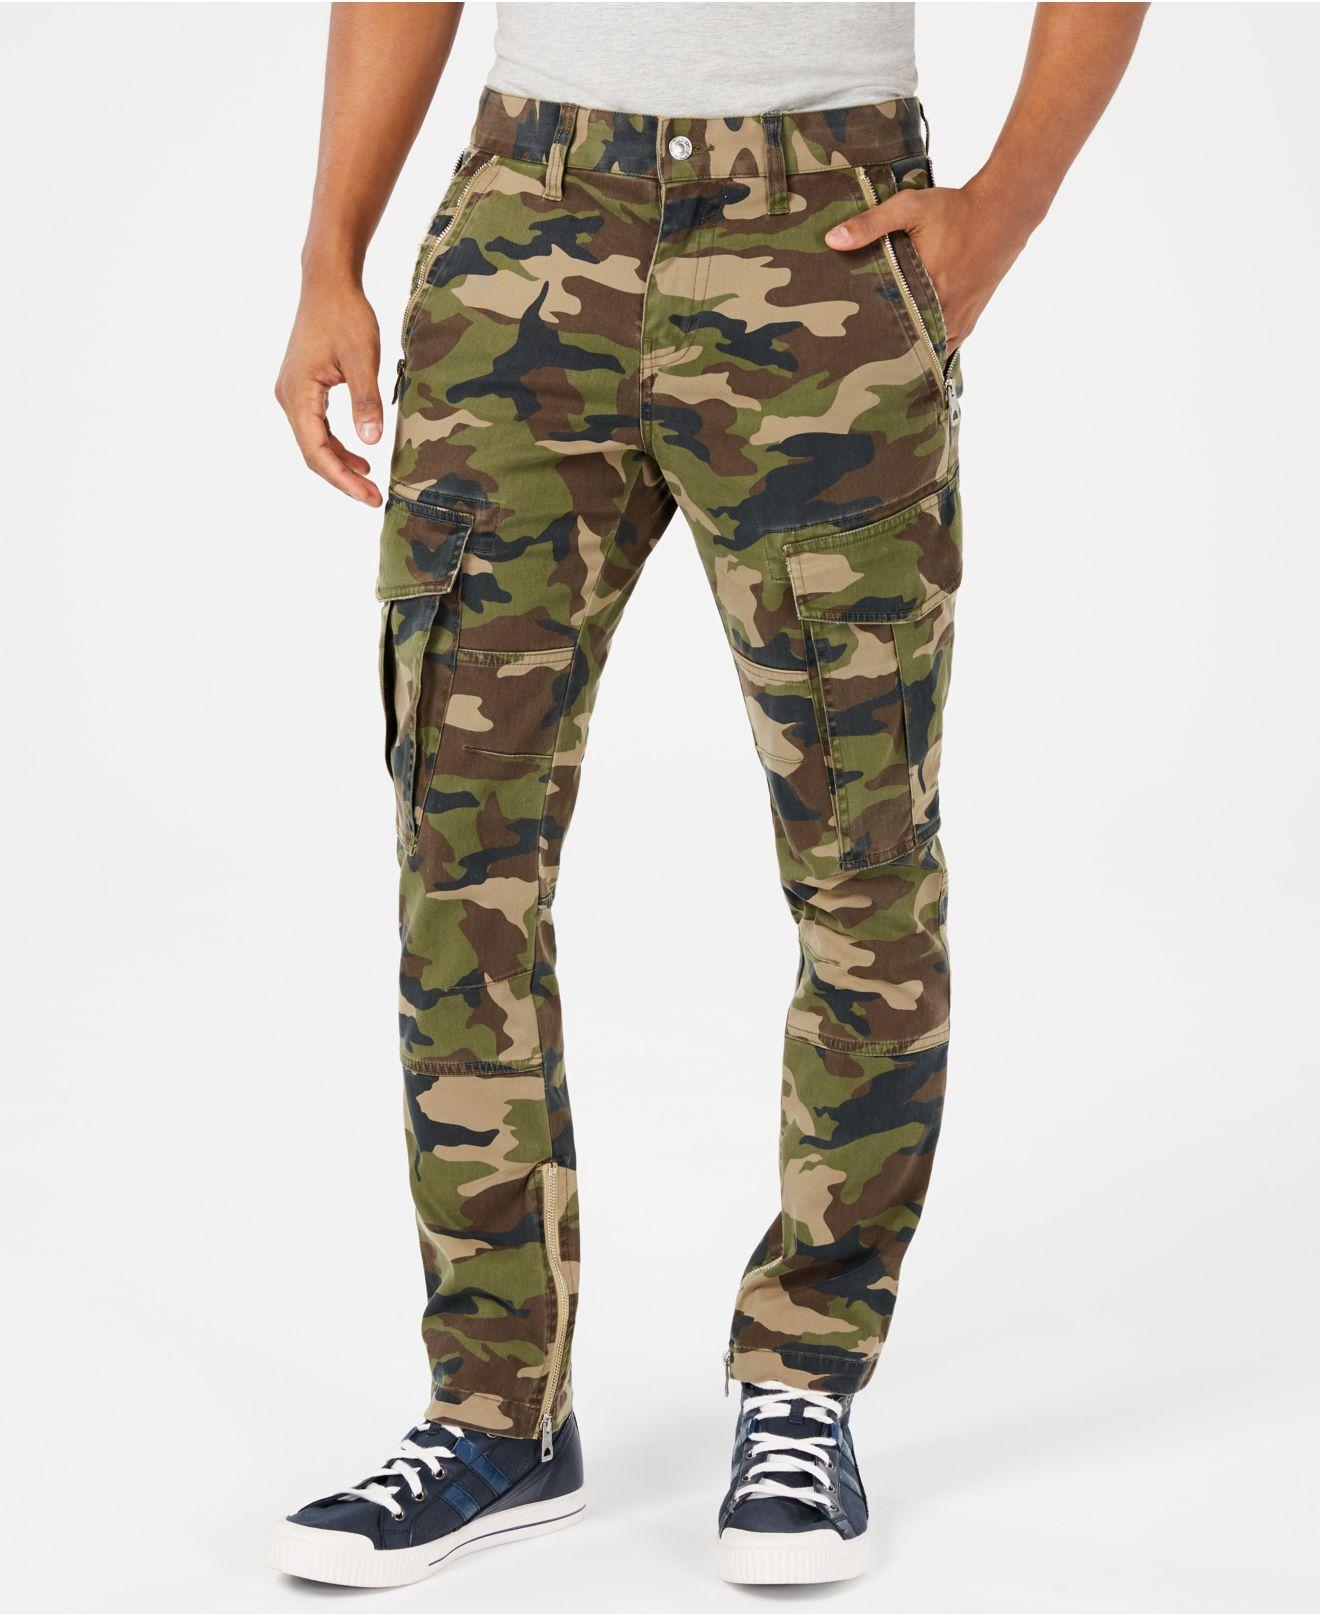 Guess Cotton Carter Twill Camo Cargo Pants in Green for Men - Lyst